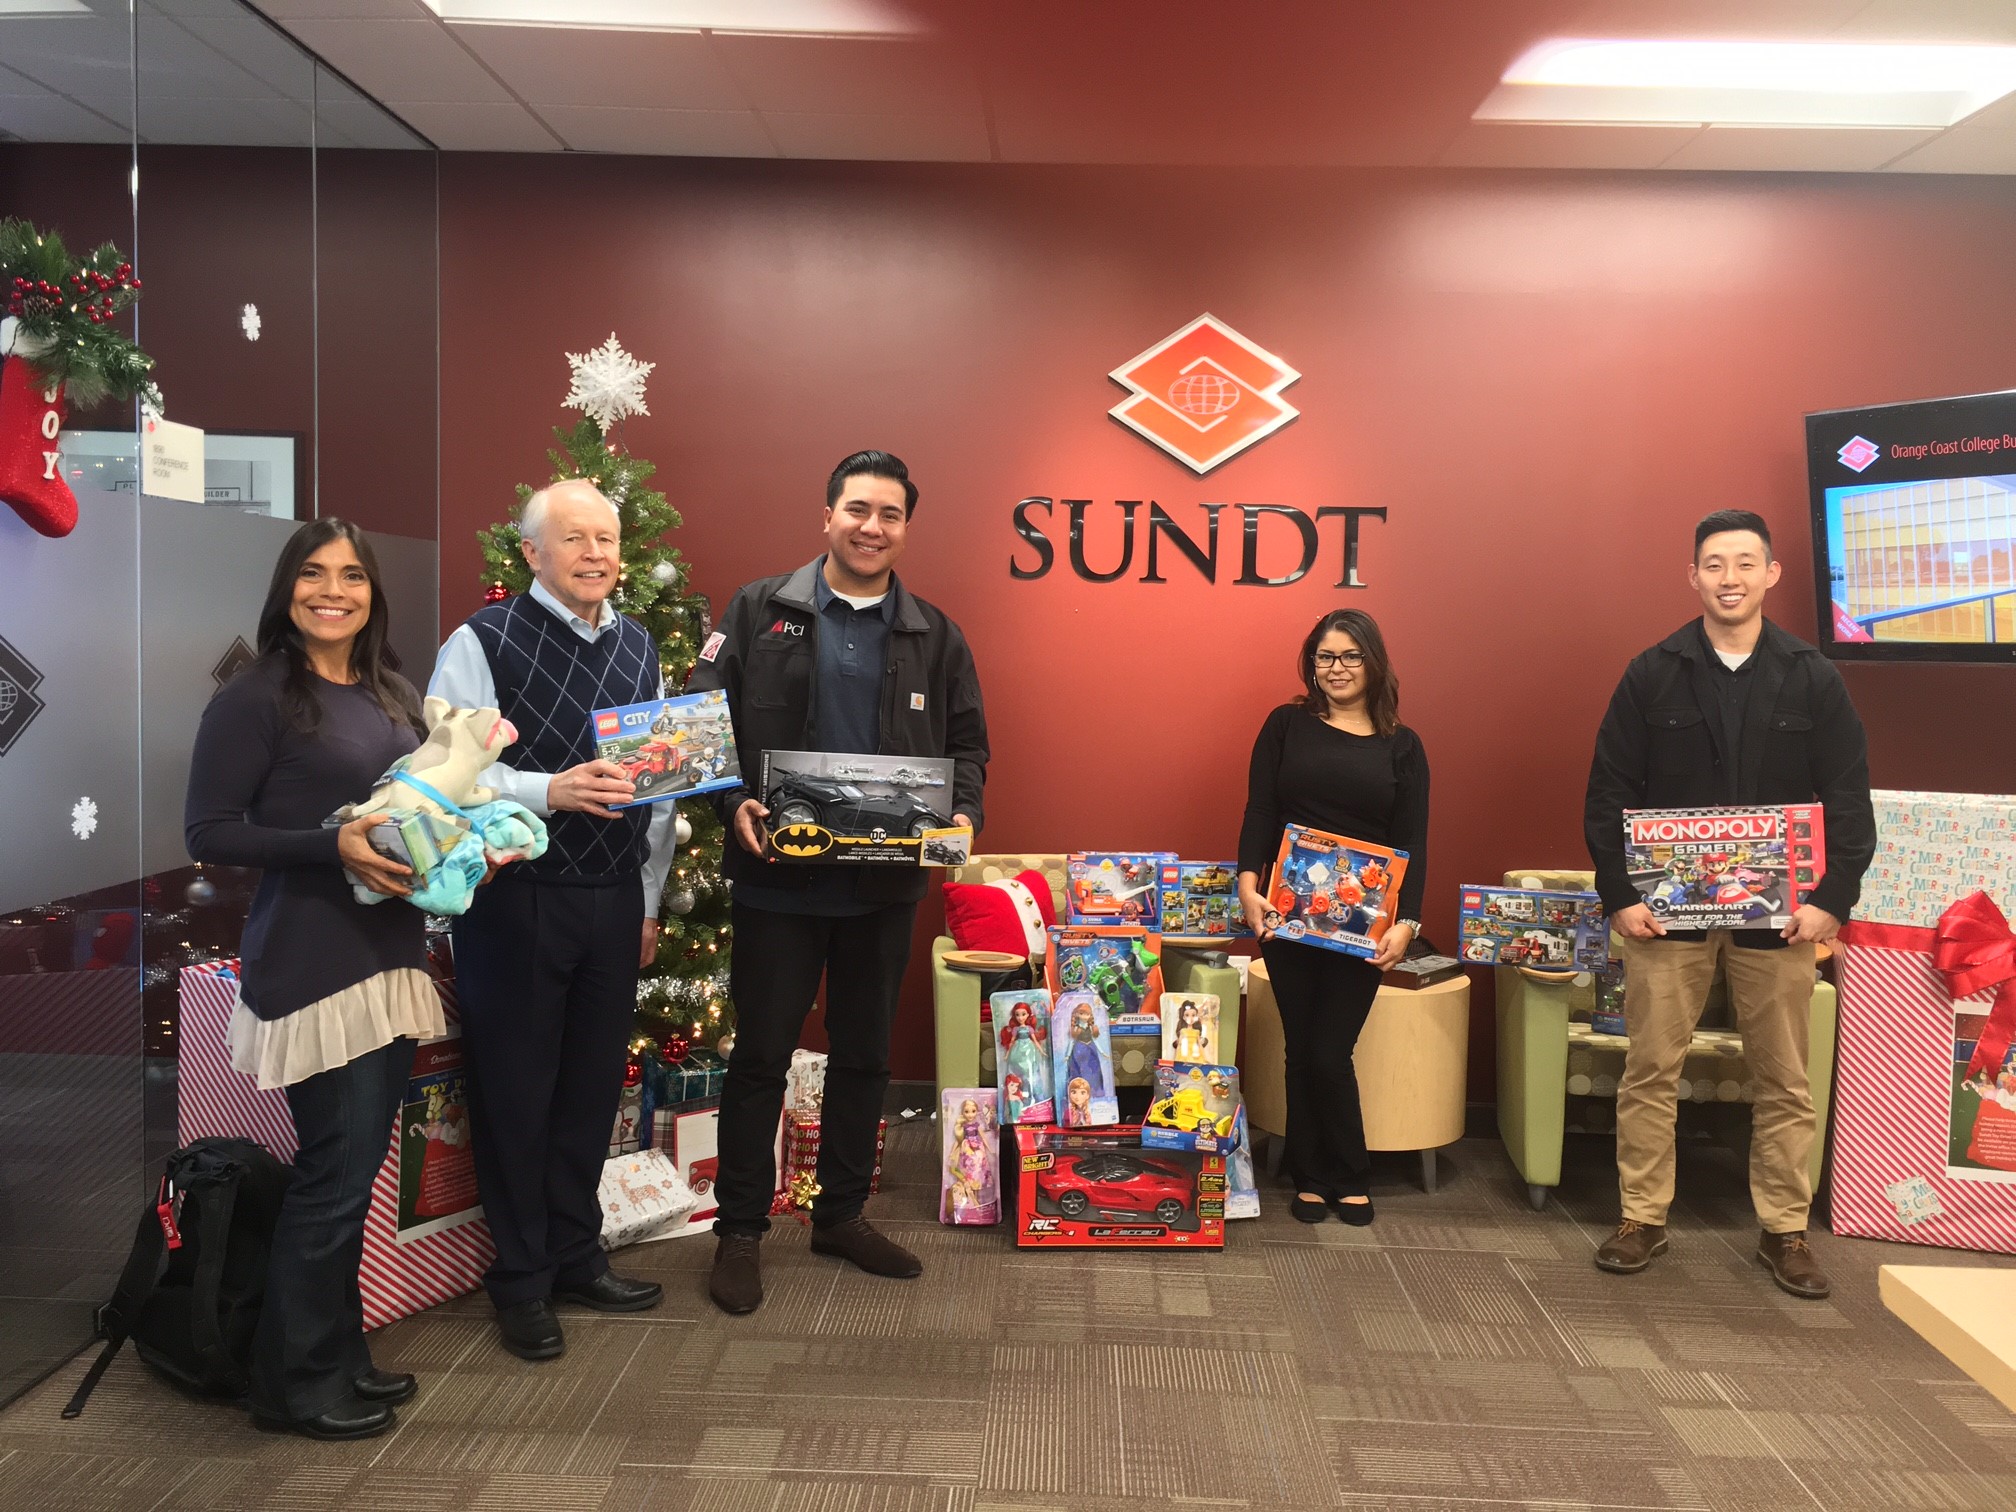 Sundt's Irvine office and area projects hosted a toy drive for CHiPs for Kids, which has been hosted by the California Highway Patrol for the past 30 years.